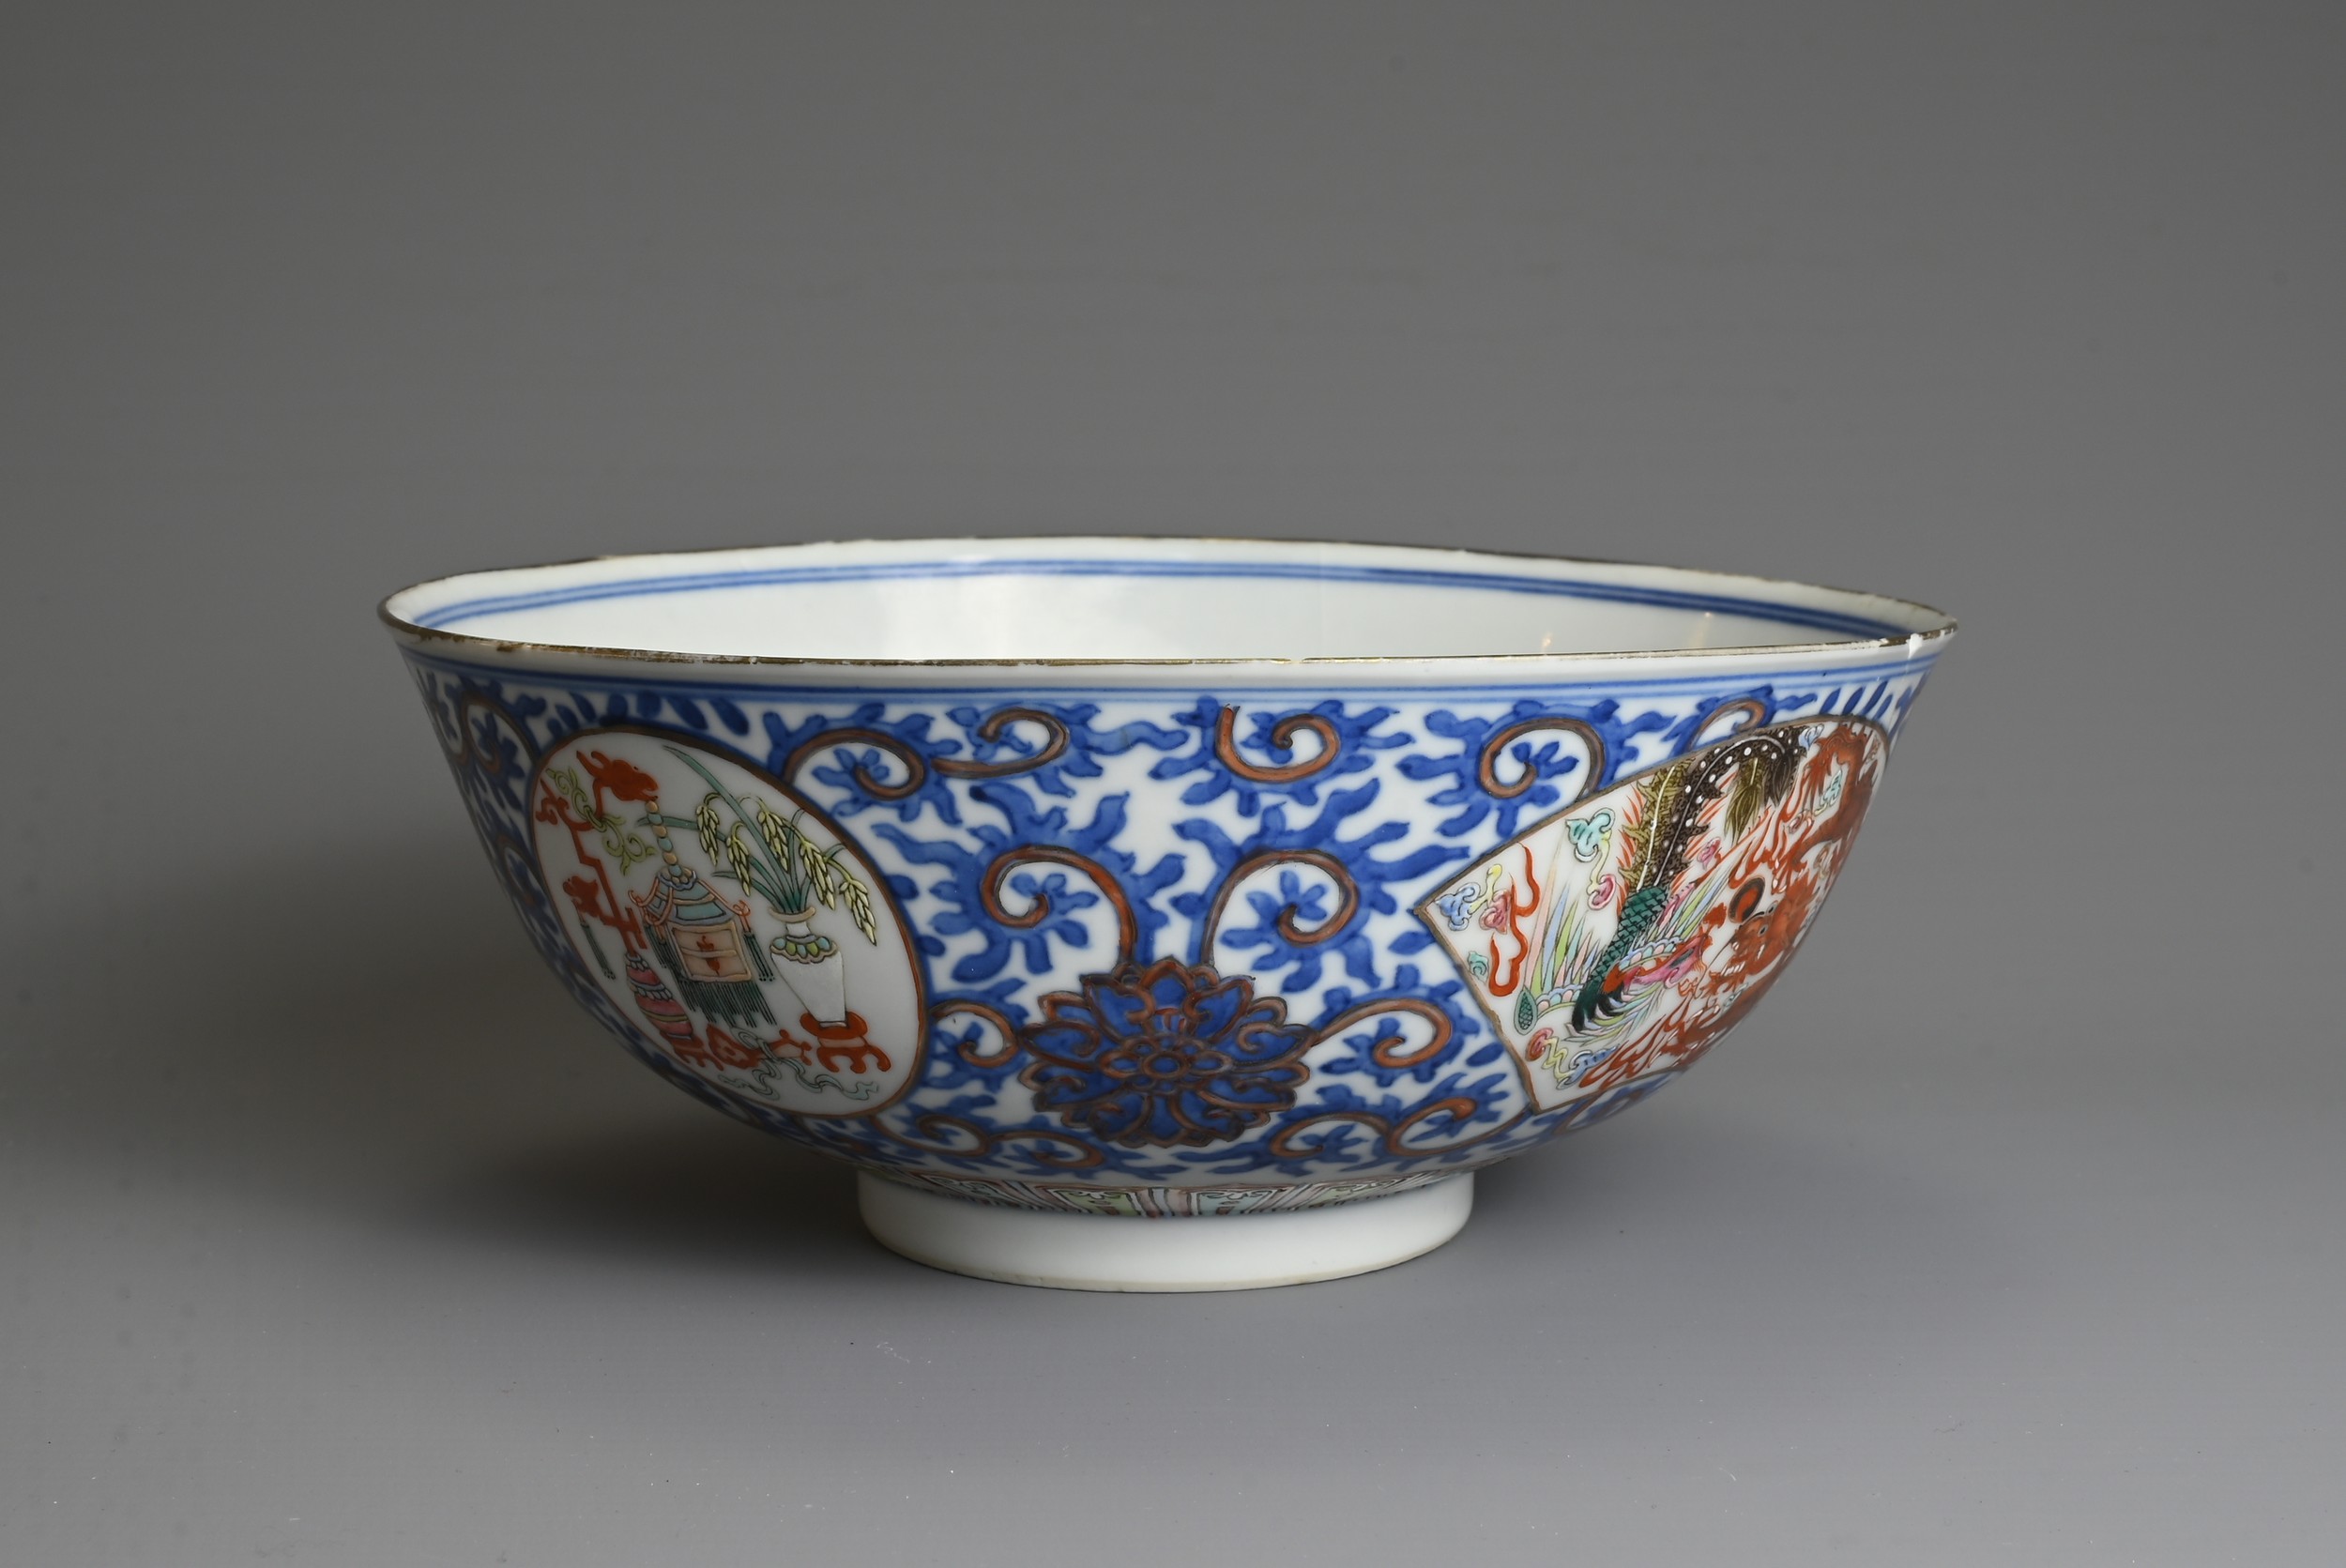 A CHINESE BLUE AND WHITE AND ENAMEL DECORATED PORCELAIN BOWL, LATE QING DYNASTY. Decorated with - Image 4 of 8